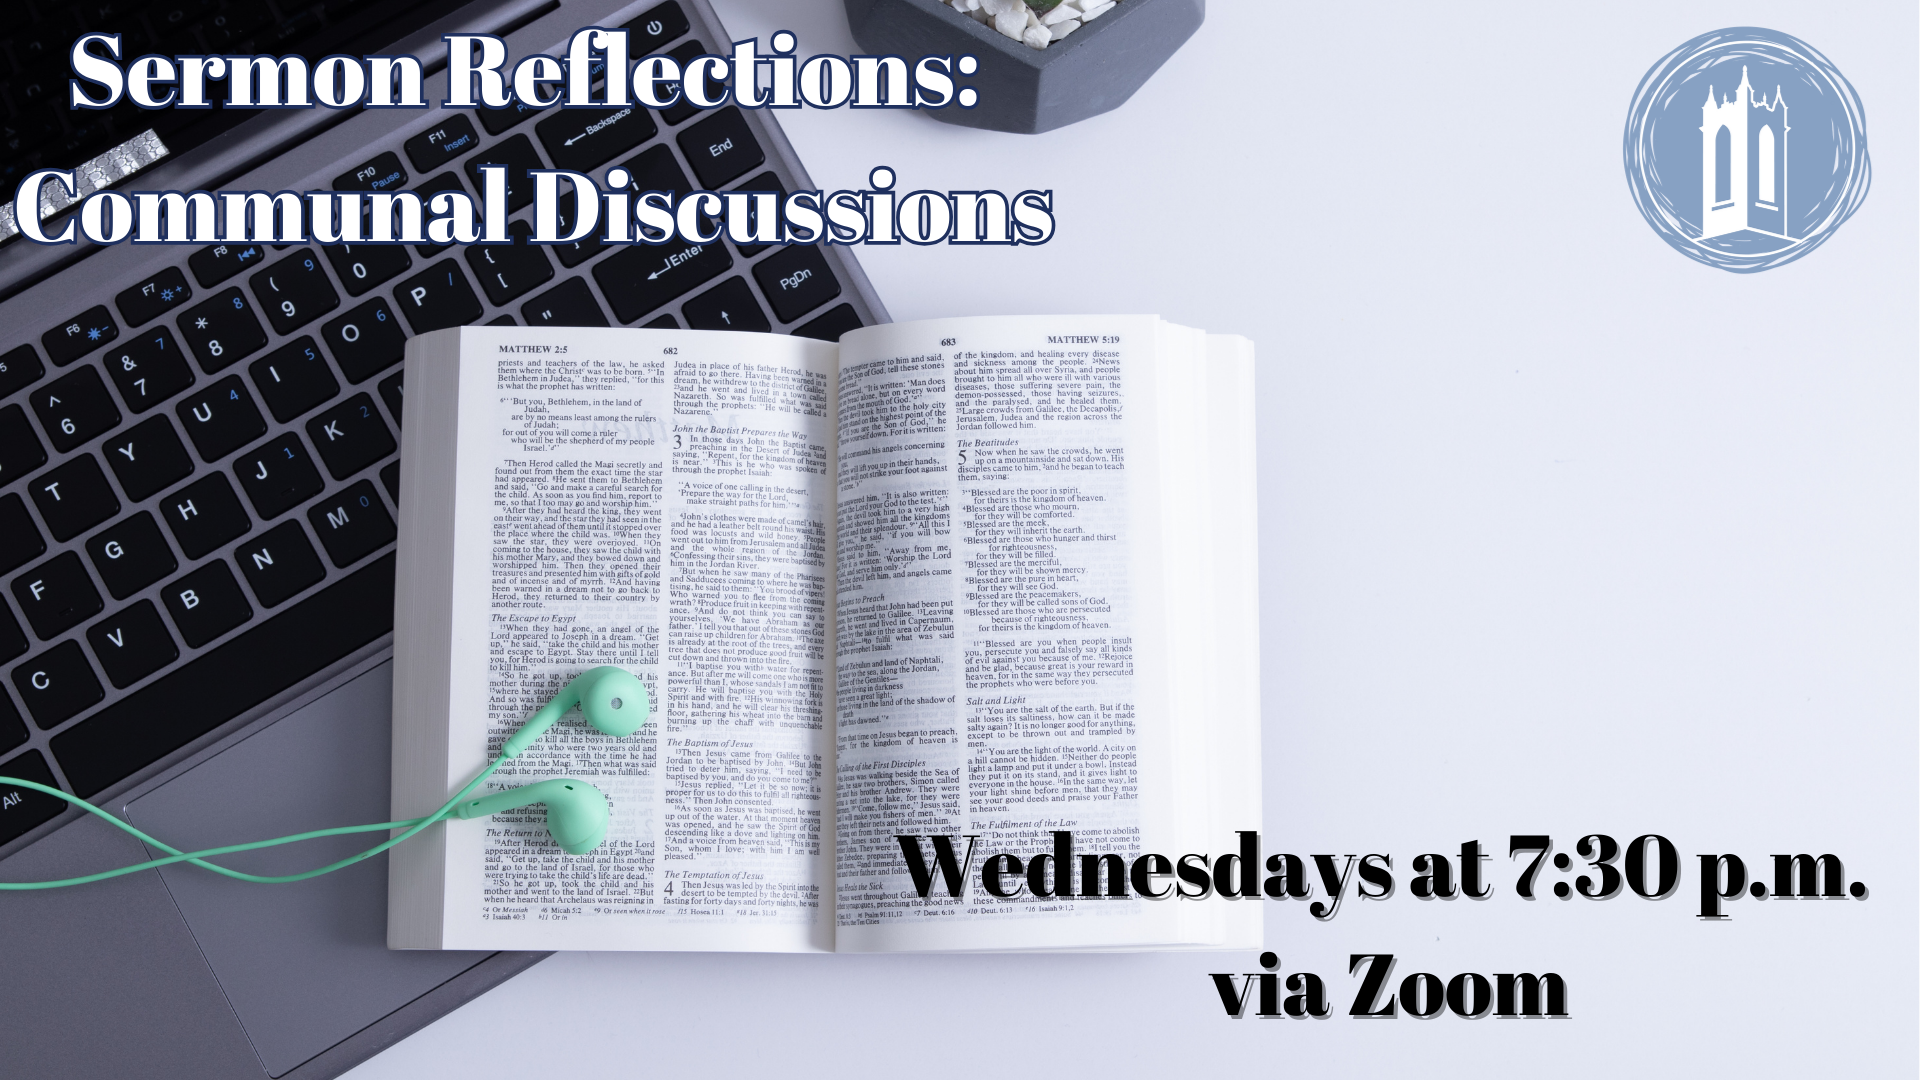 Sermon Reflections: Communal Discussion